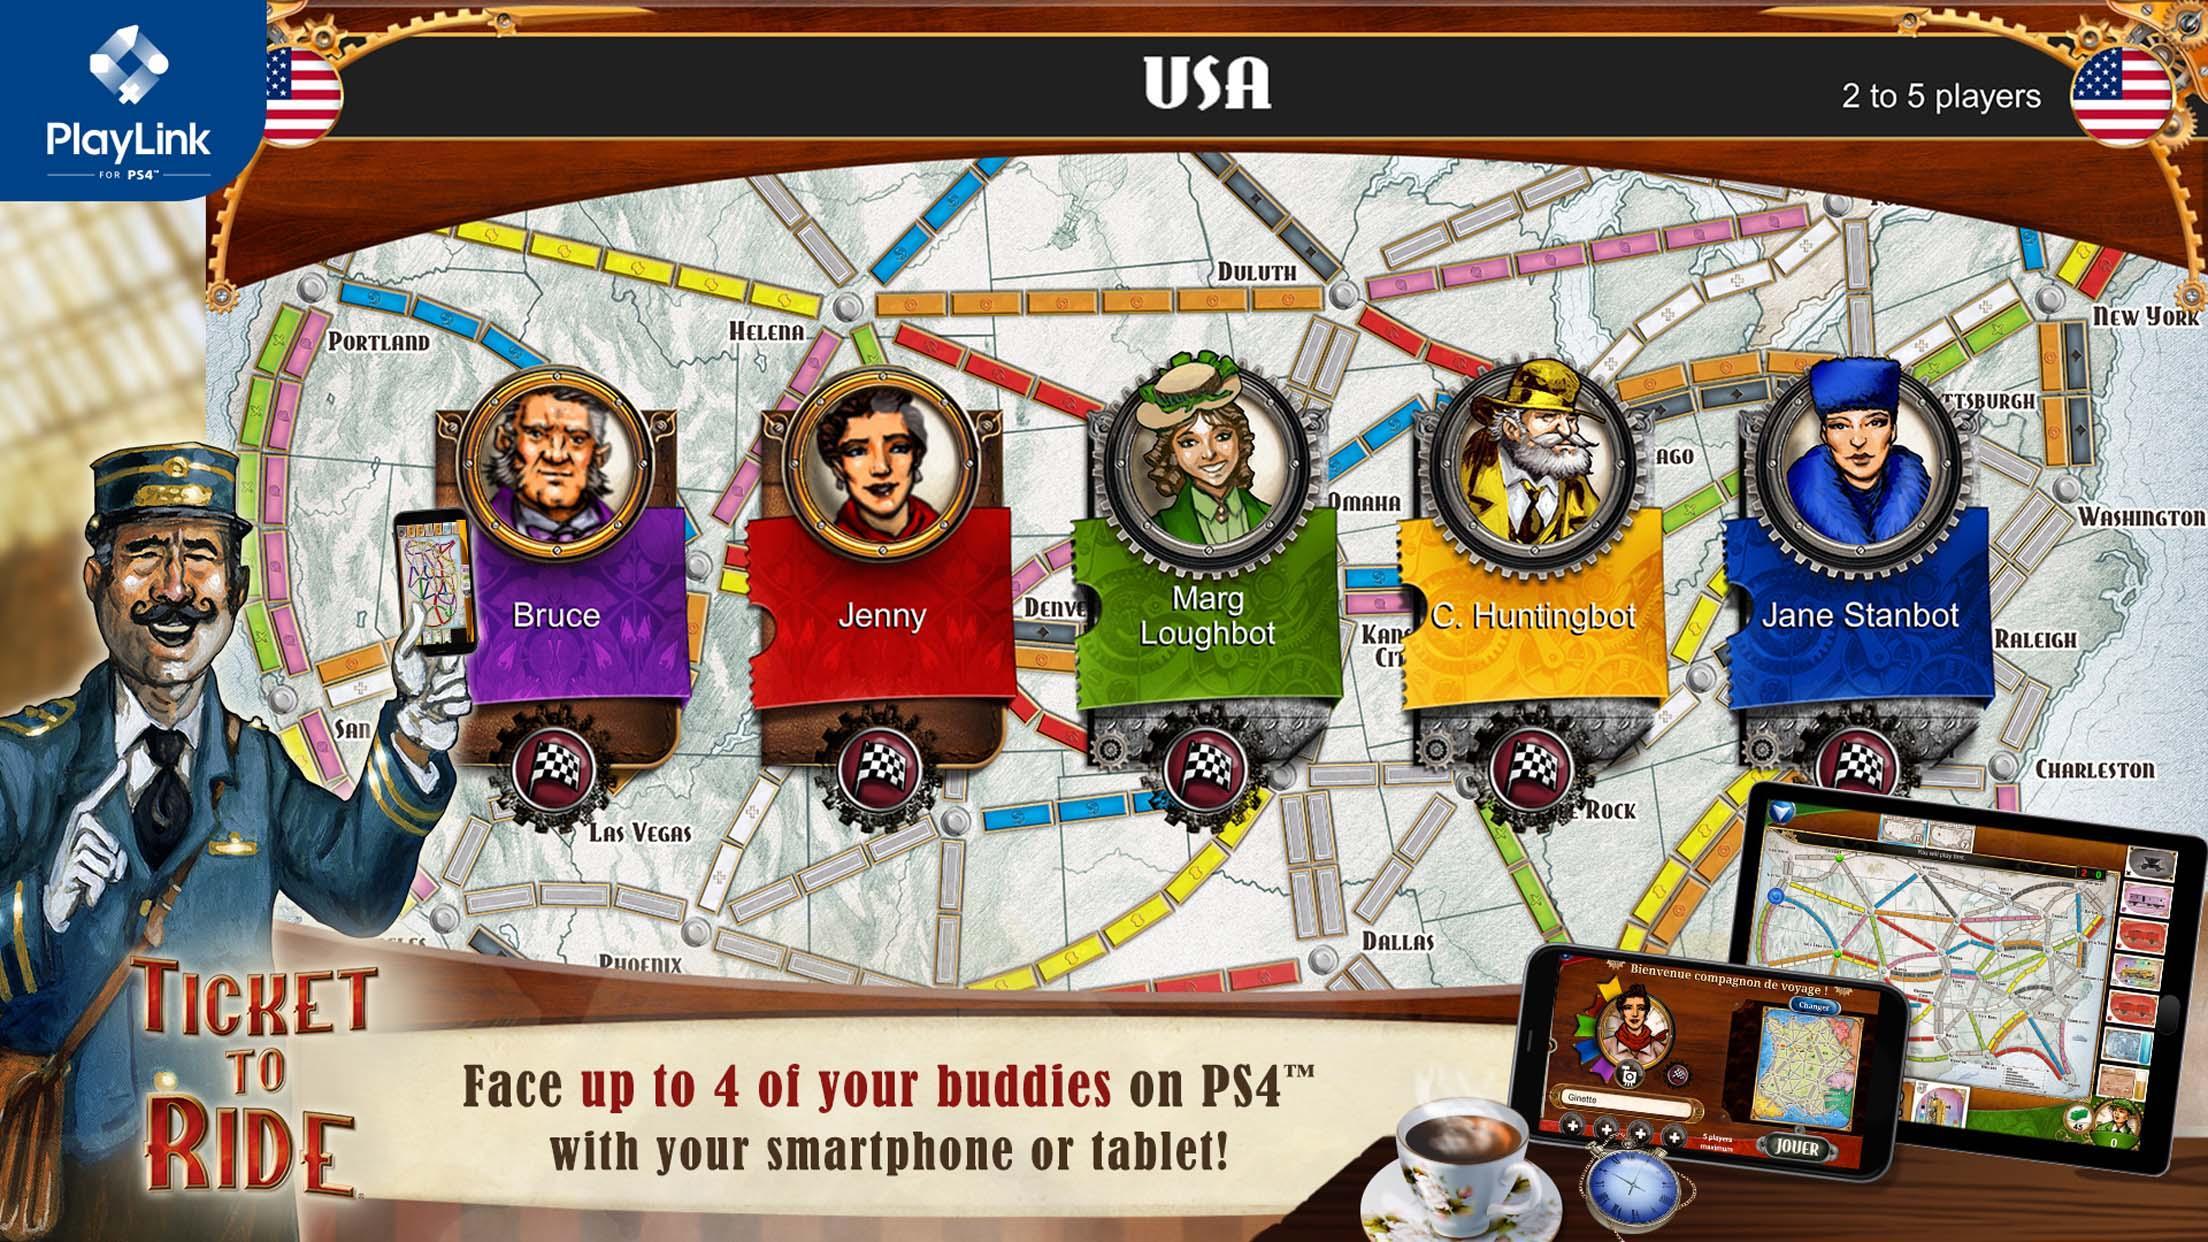 Ticket to Ride for PlayLink 2.7.2-6472-ceb1ea16 Screenshot 1